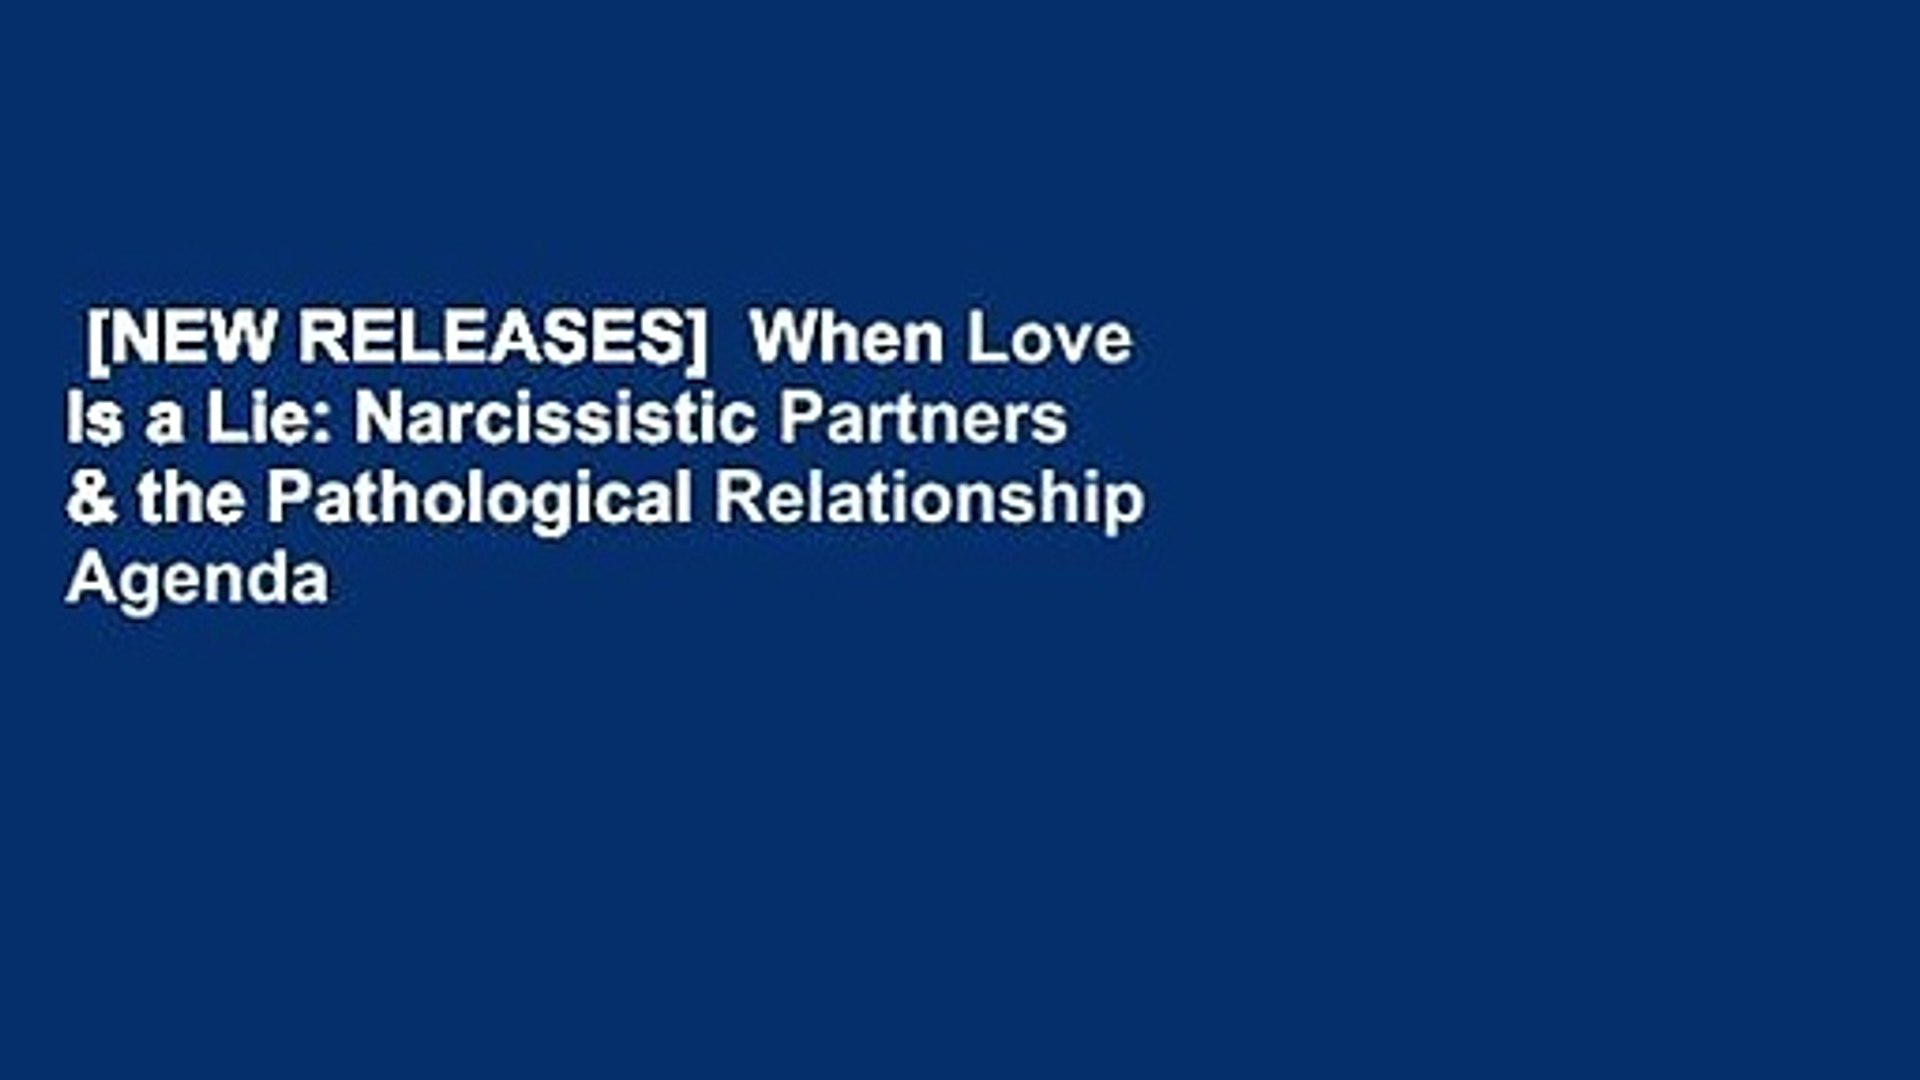 When Love Is a Lie: Narcissistic Partners & the Pathological